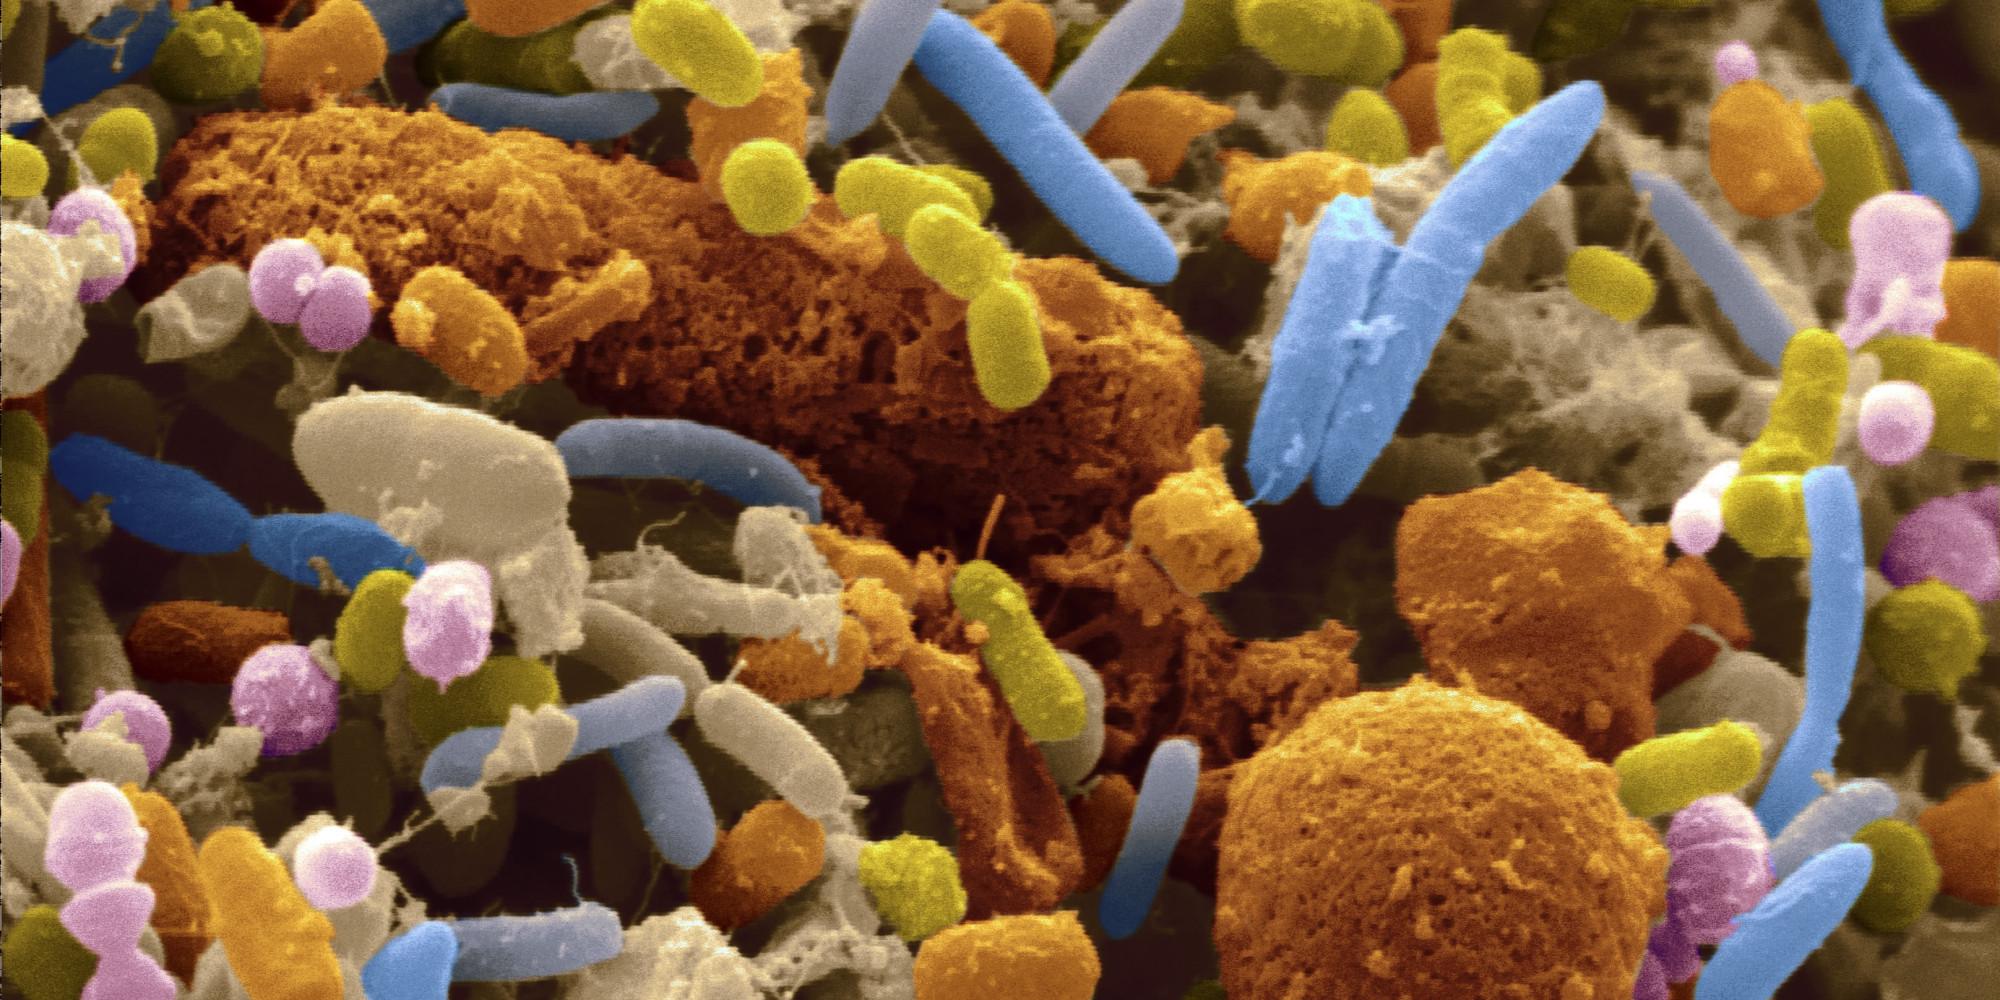 Microbiotica, the latest spin-out from the Wellcome Trust Sanger Institute